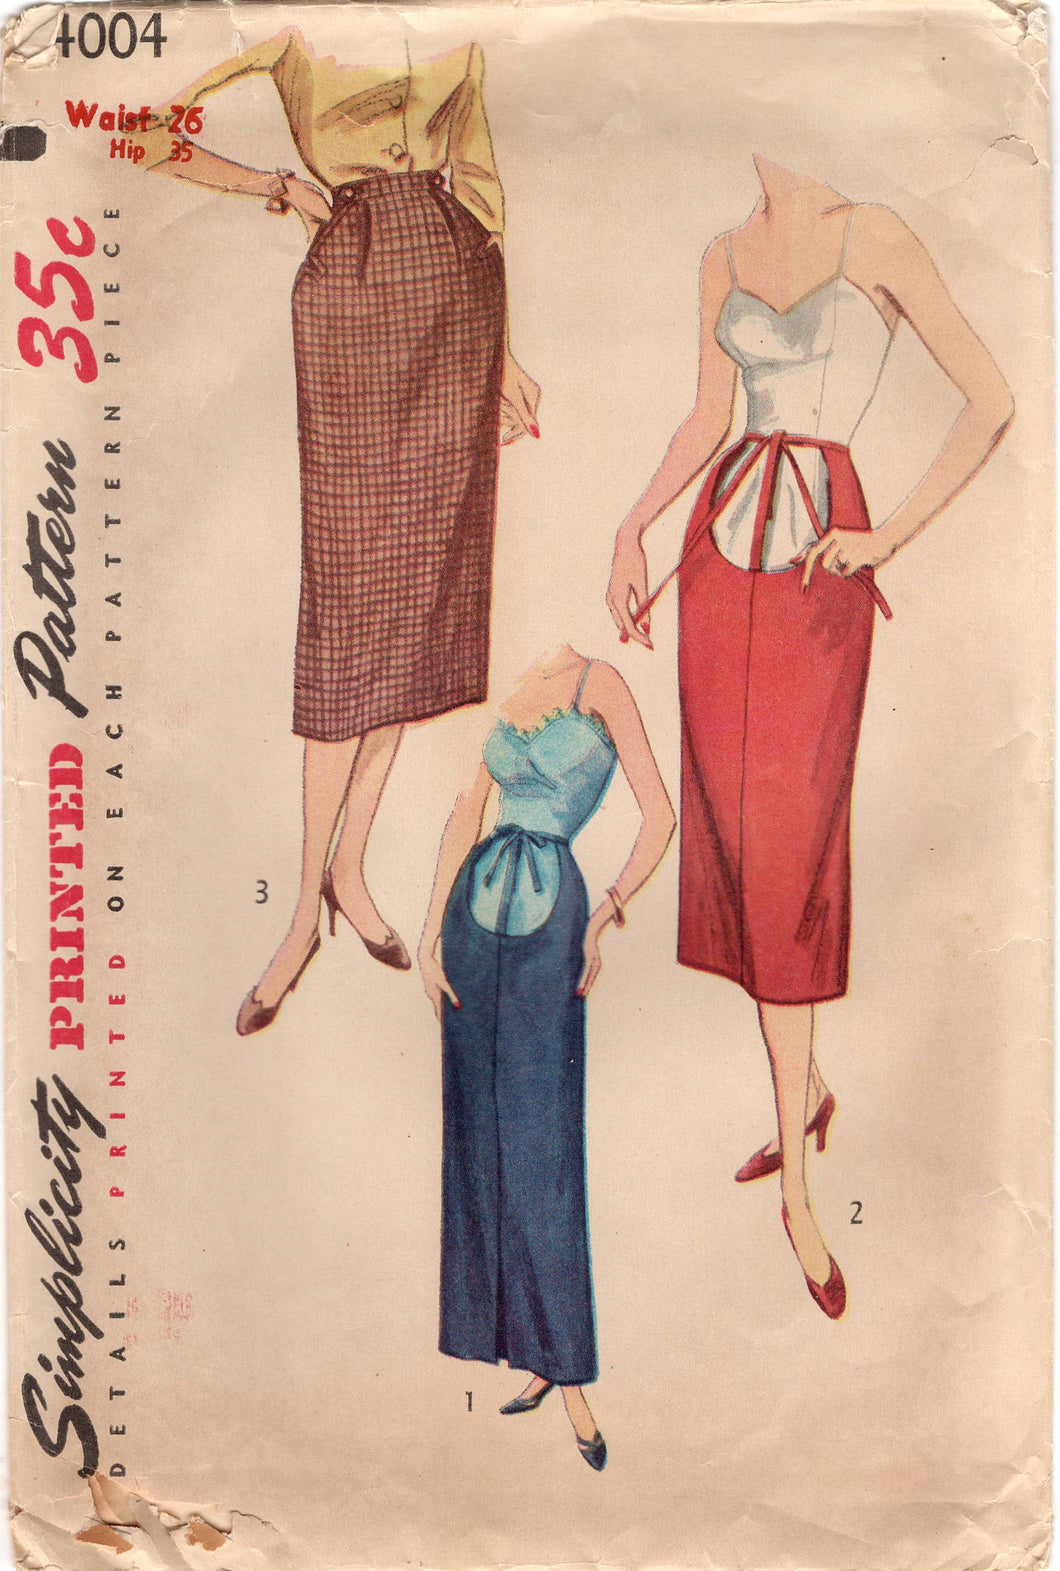 1950's Simplicity Maternity Skirt in two lengths - Waist 26